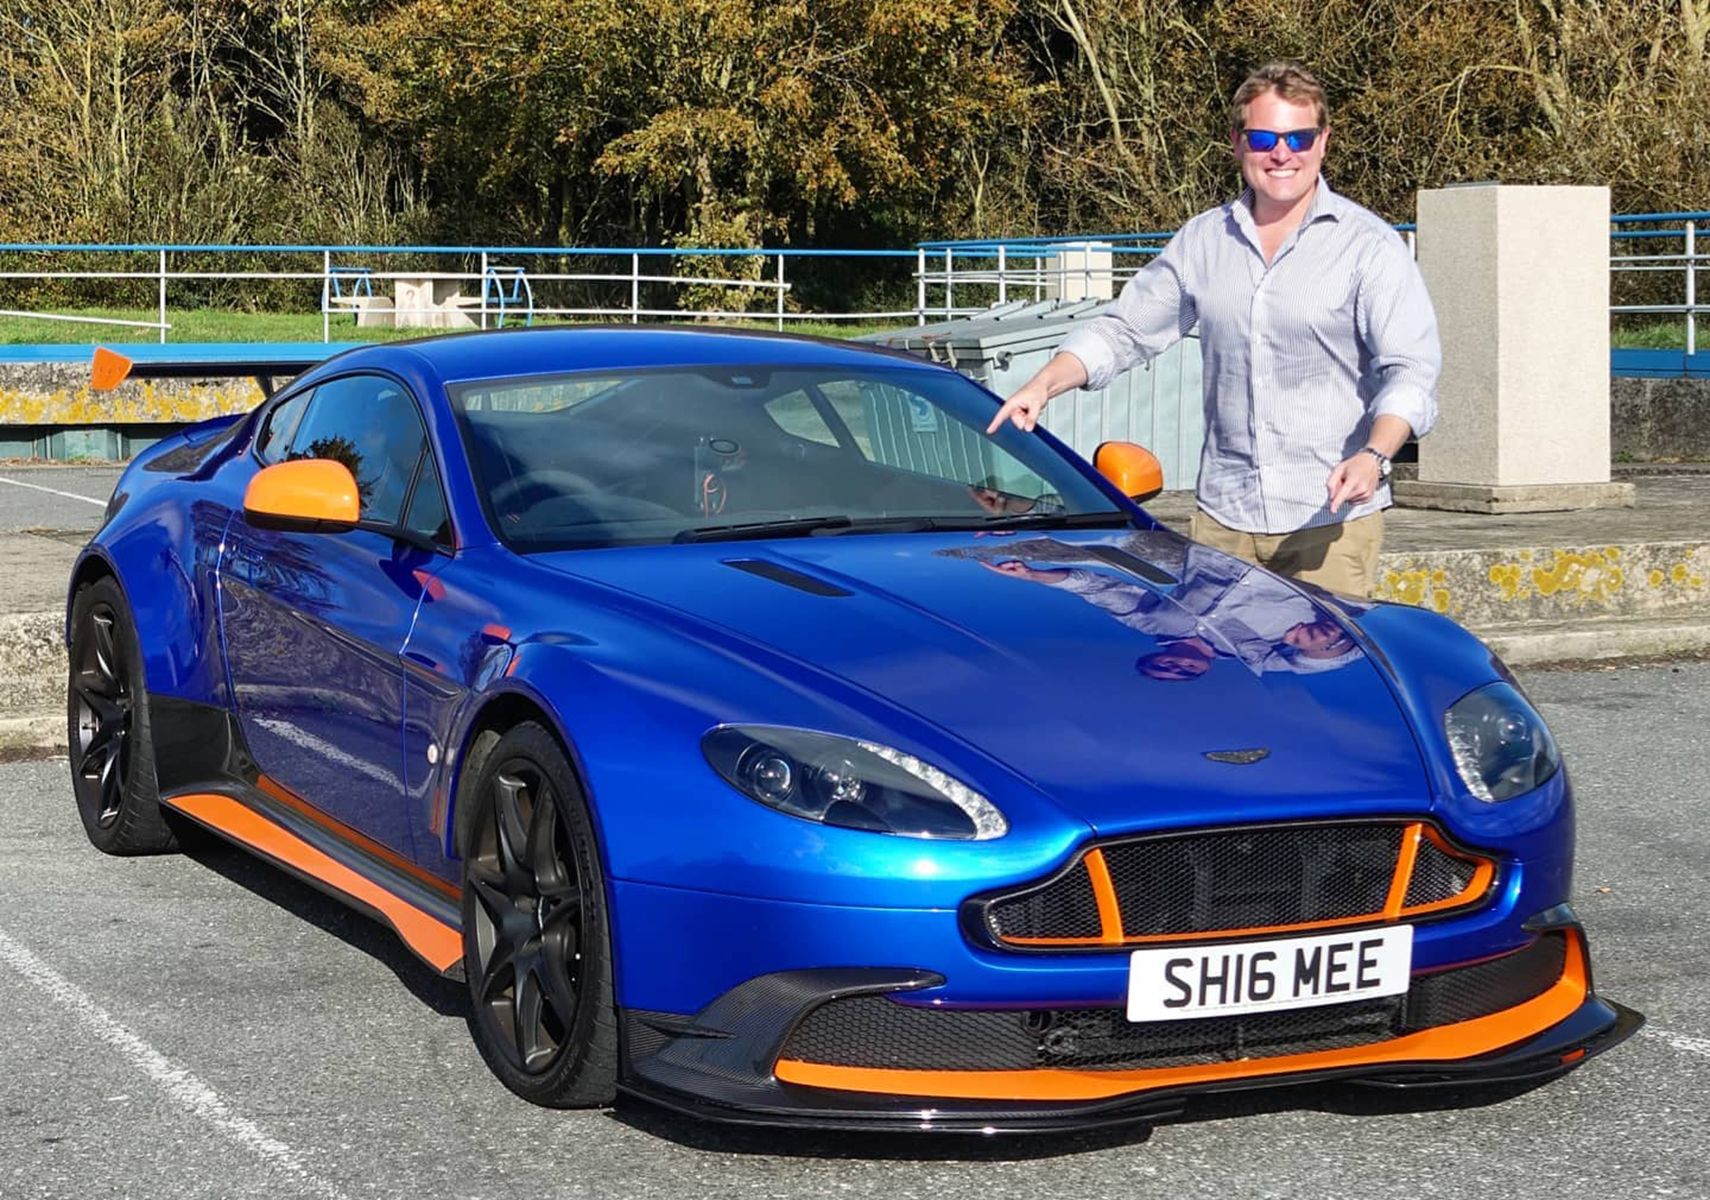 Shmee150 with his Aston Martin Vantage GT8 in France